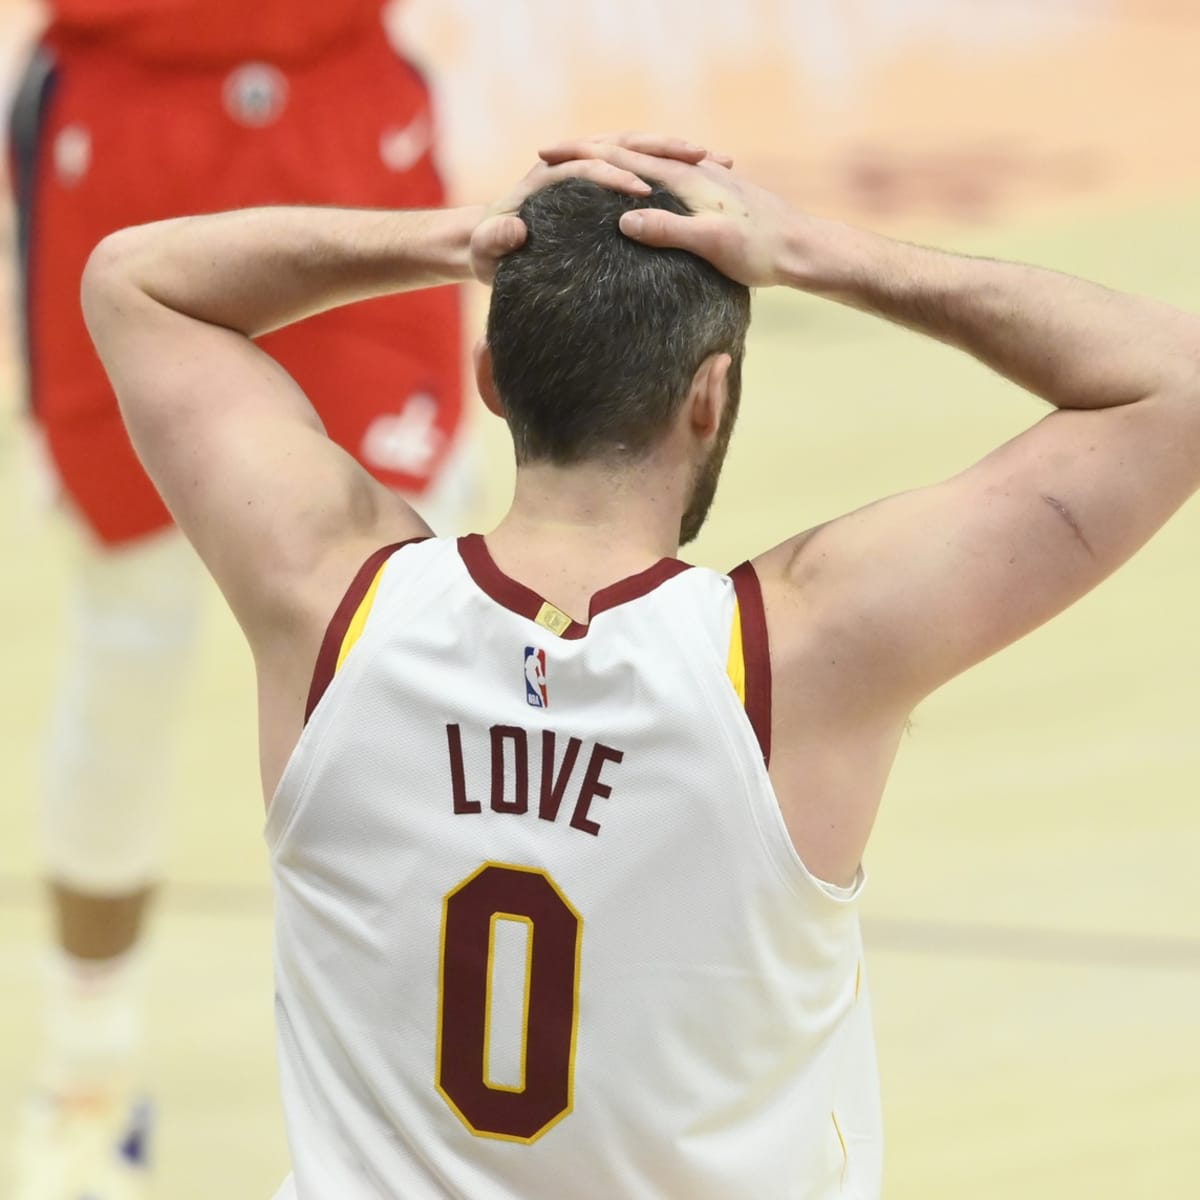 Kevin Love celebrates baby's birth, will play in Game 5 of NBA Finals